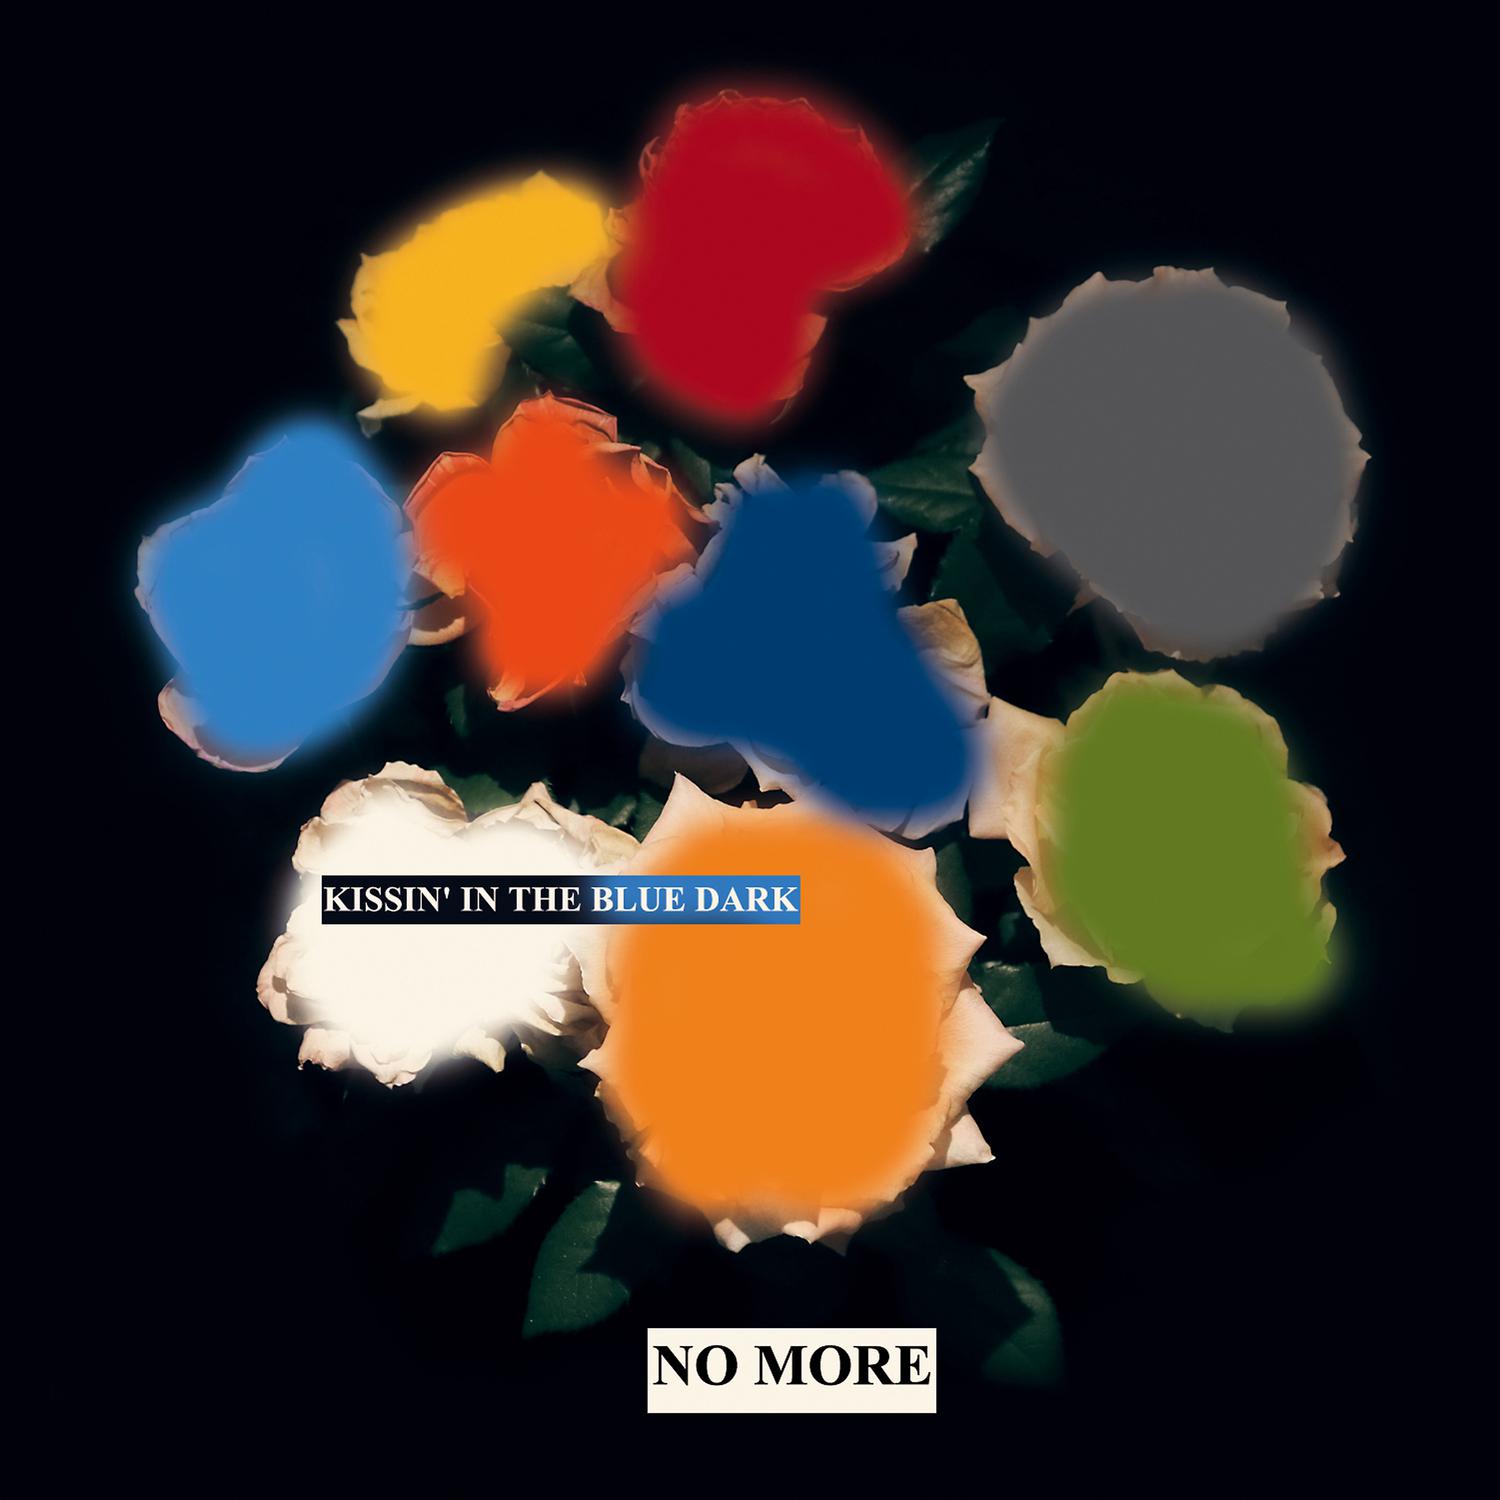 No More - Words, Vows, Gifts and Tears